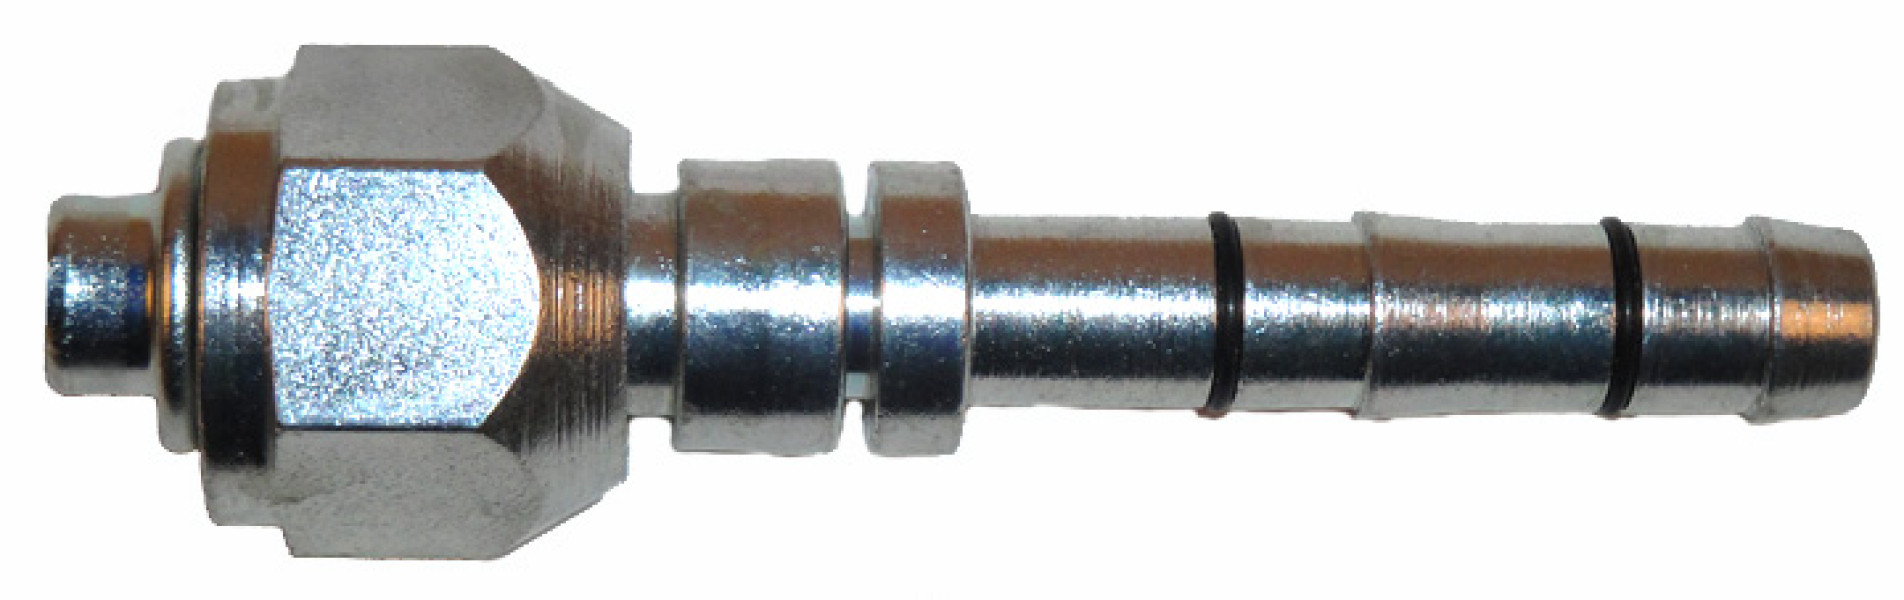 Image of A/C Refrigerant Hose Fitting from Sunair. Part number: FF14176